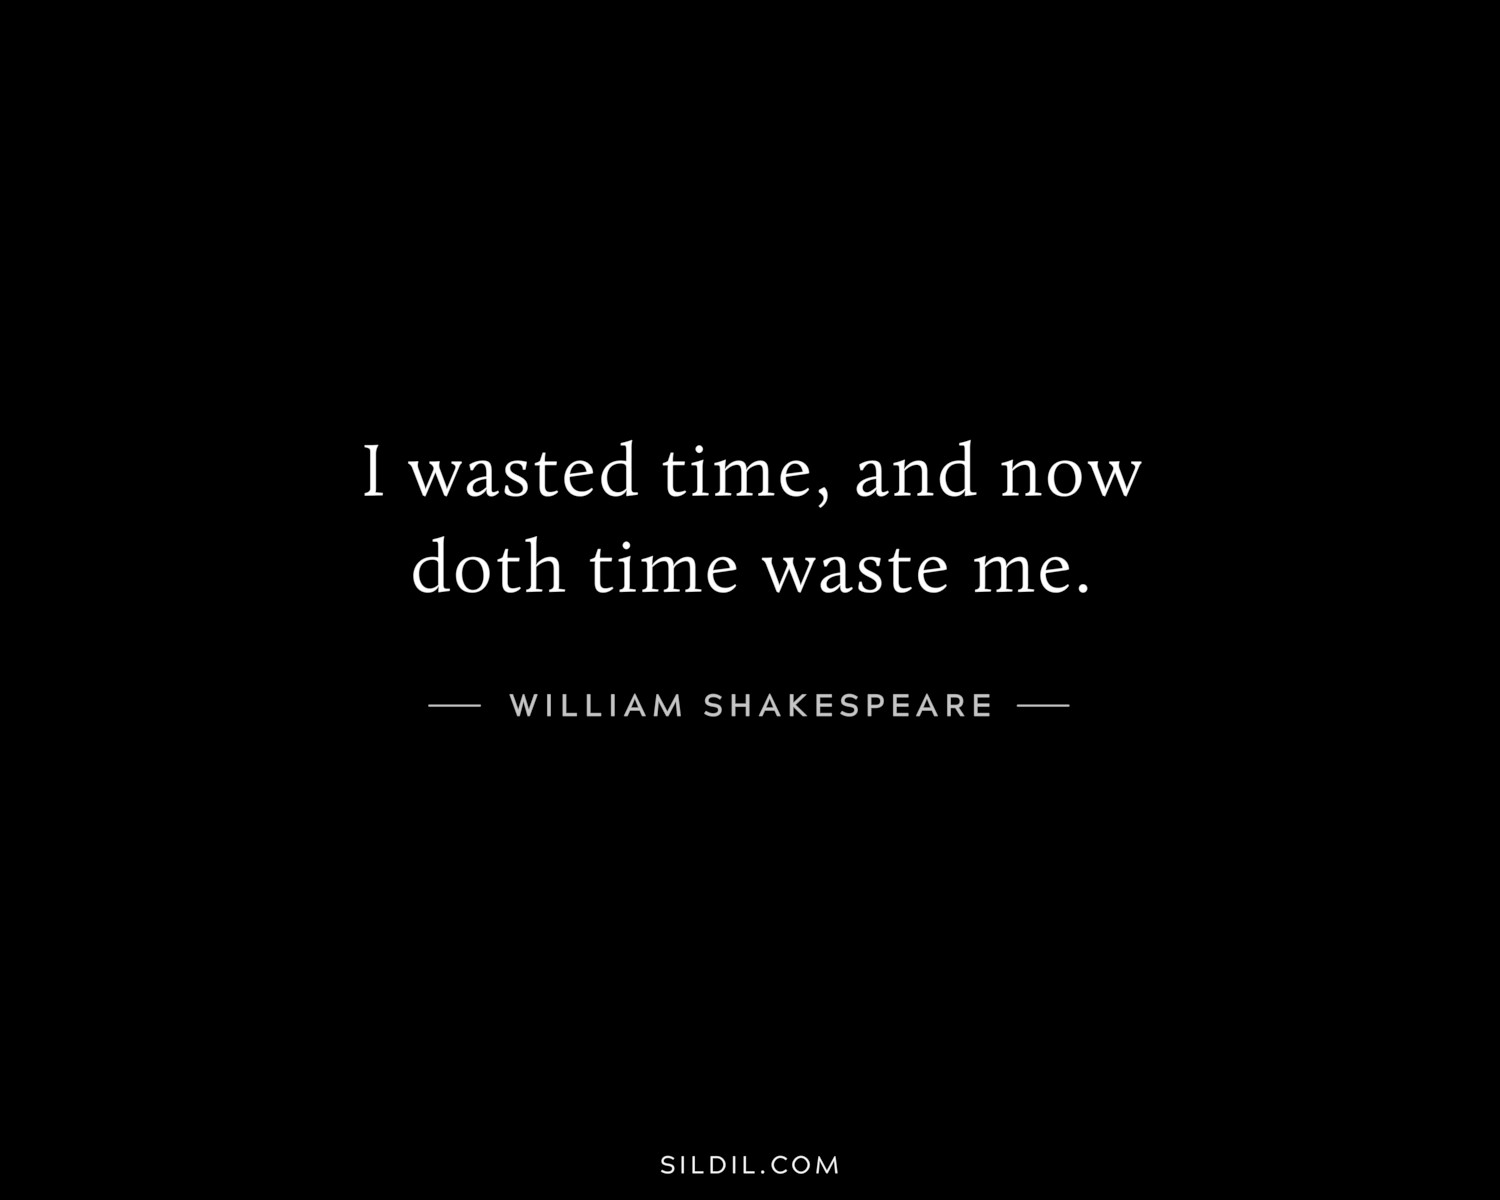 I wasted time, and now doth time waste me.